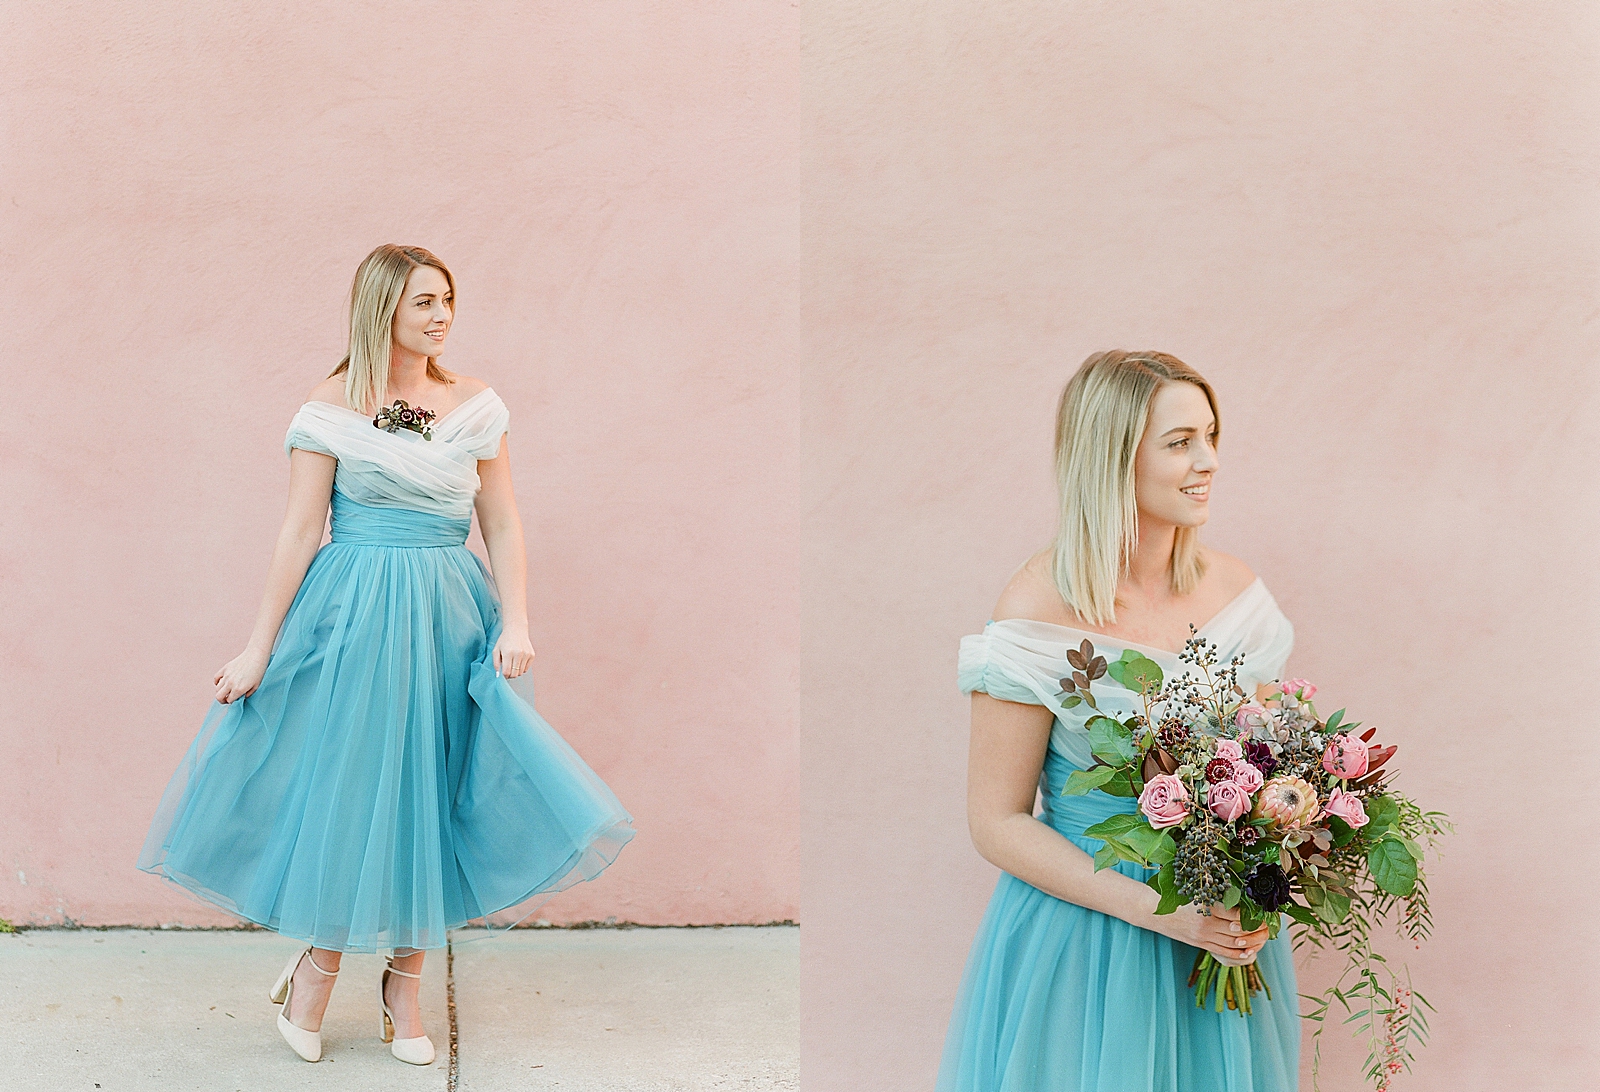 Jamie in Vintage Blue Dress Twirling and Holding Bouquet Flowers Photos 